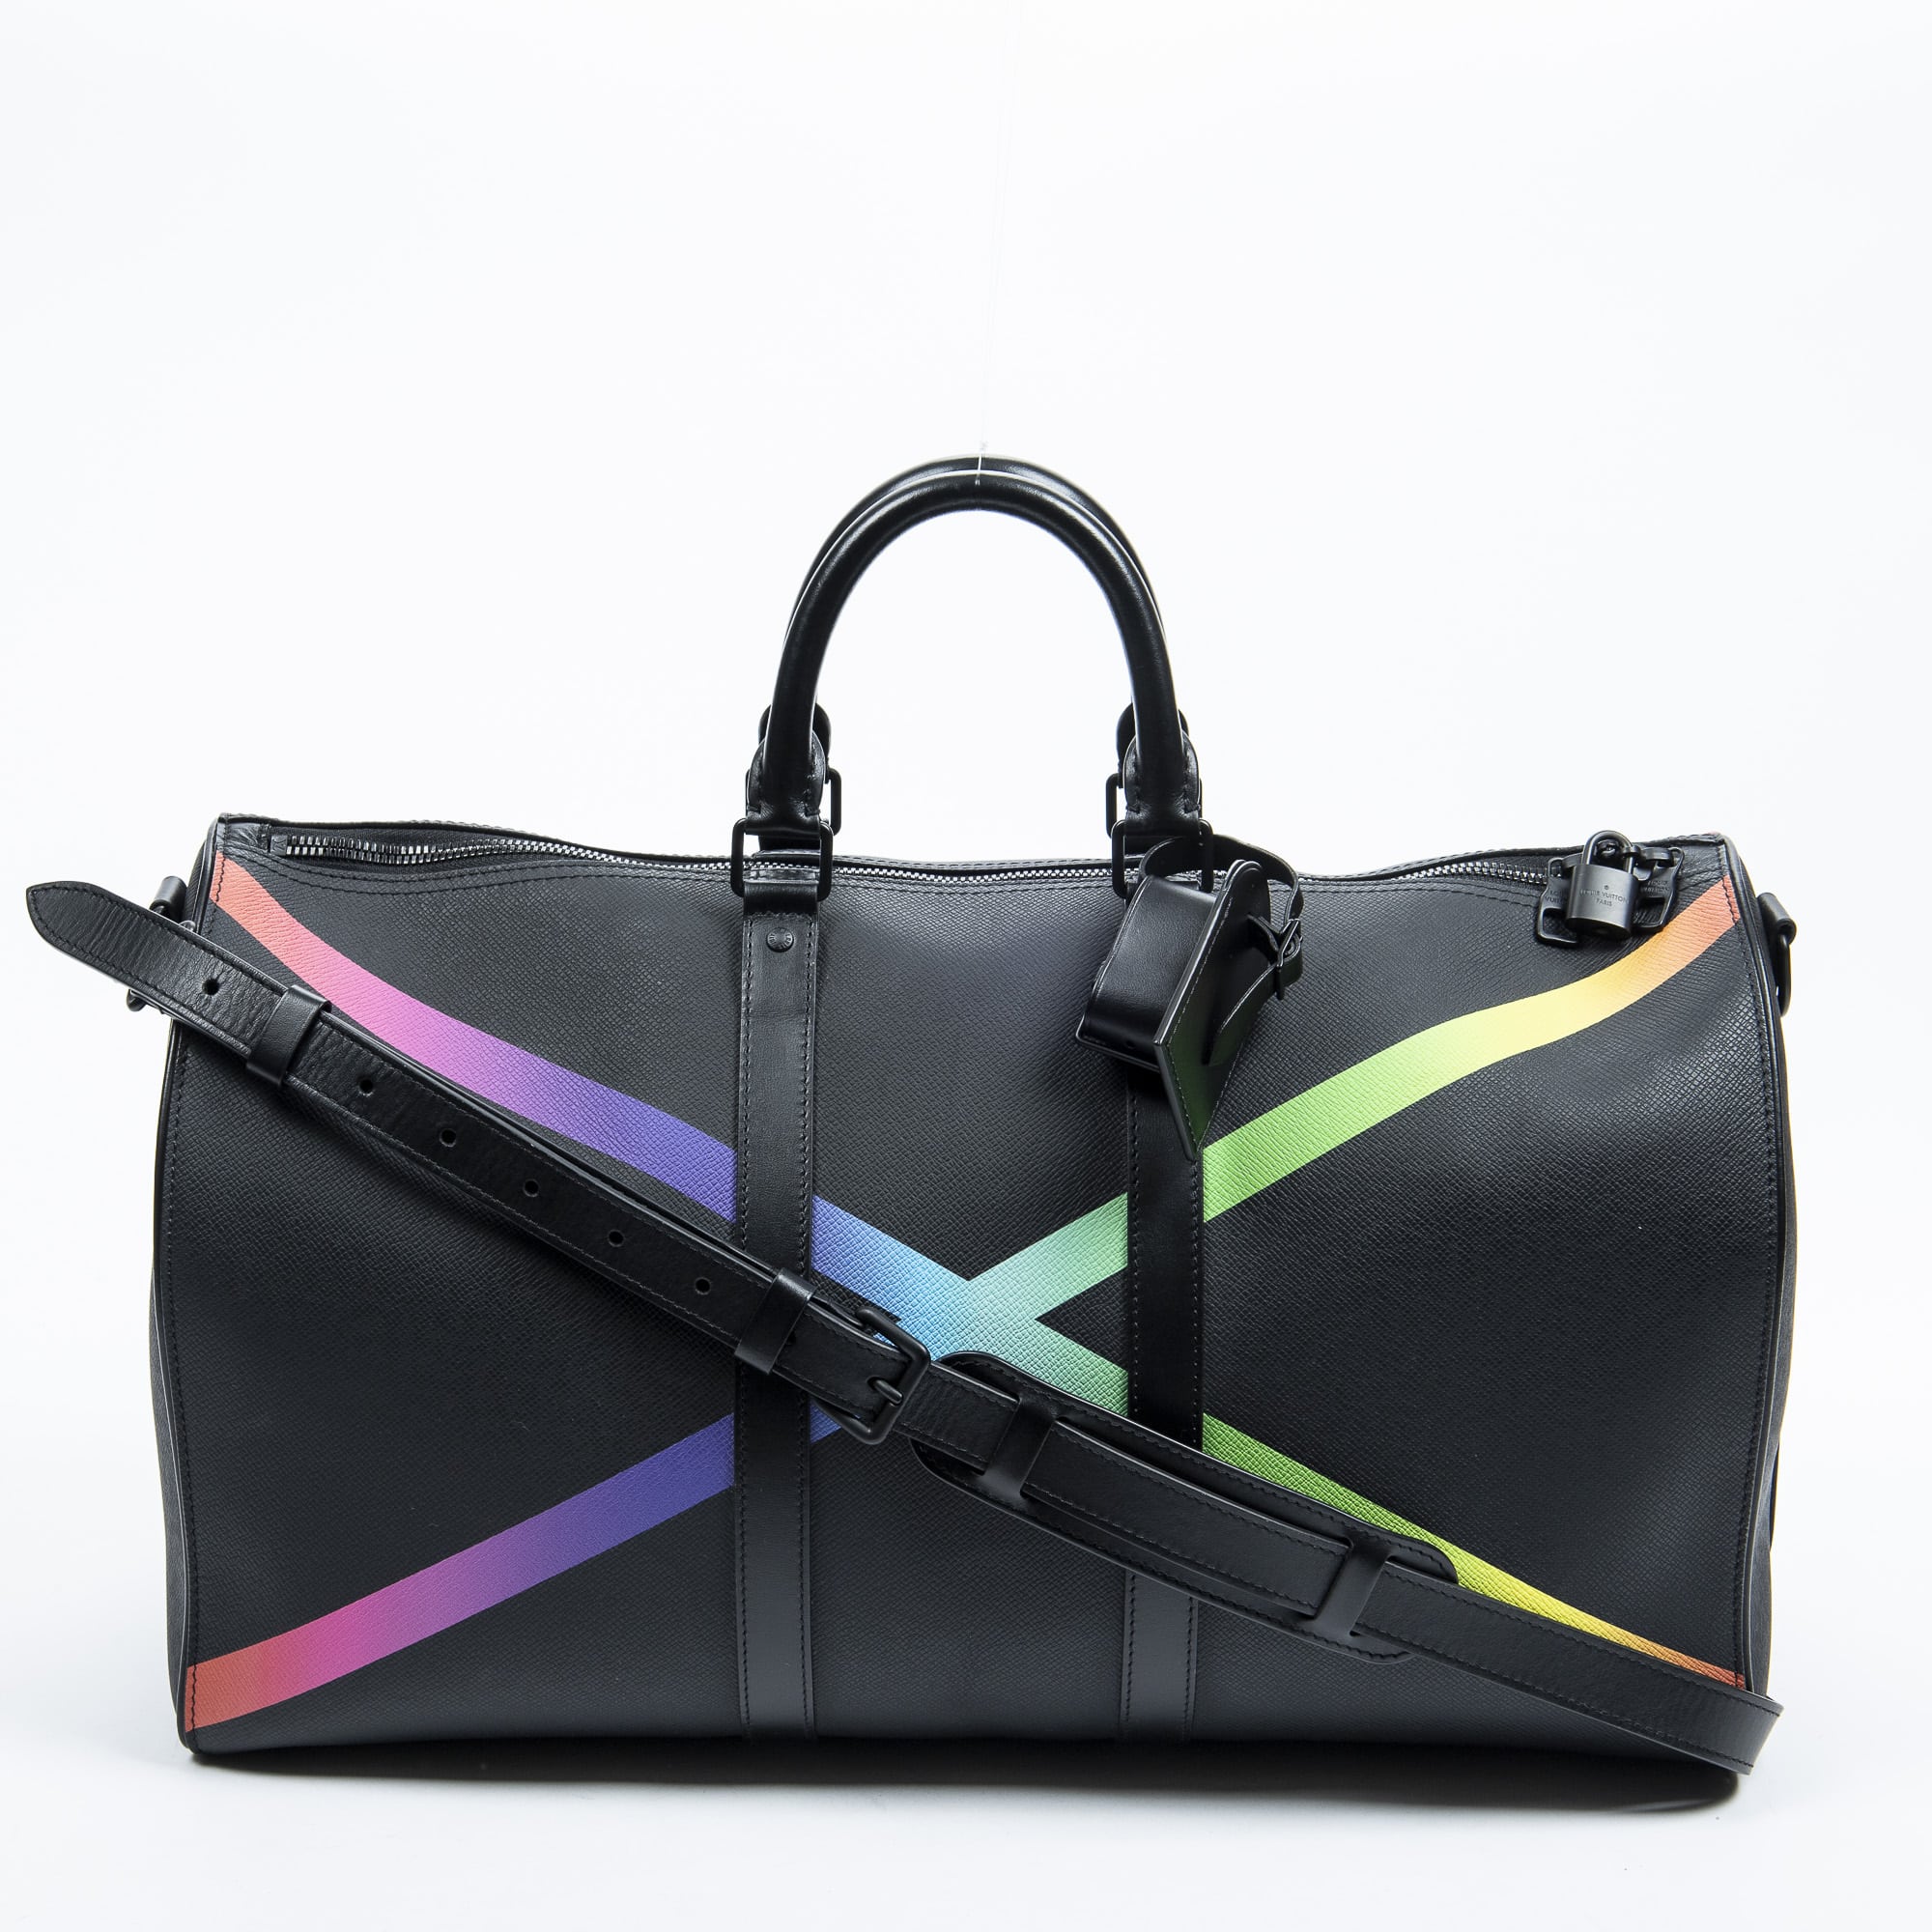 Attracted to Louis Vuitton's Men's Bags for Fall/Winter 2019